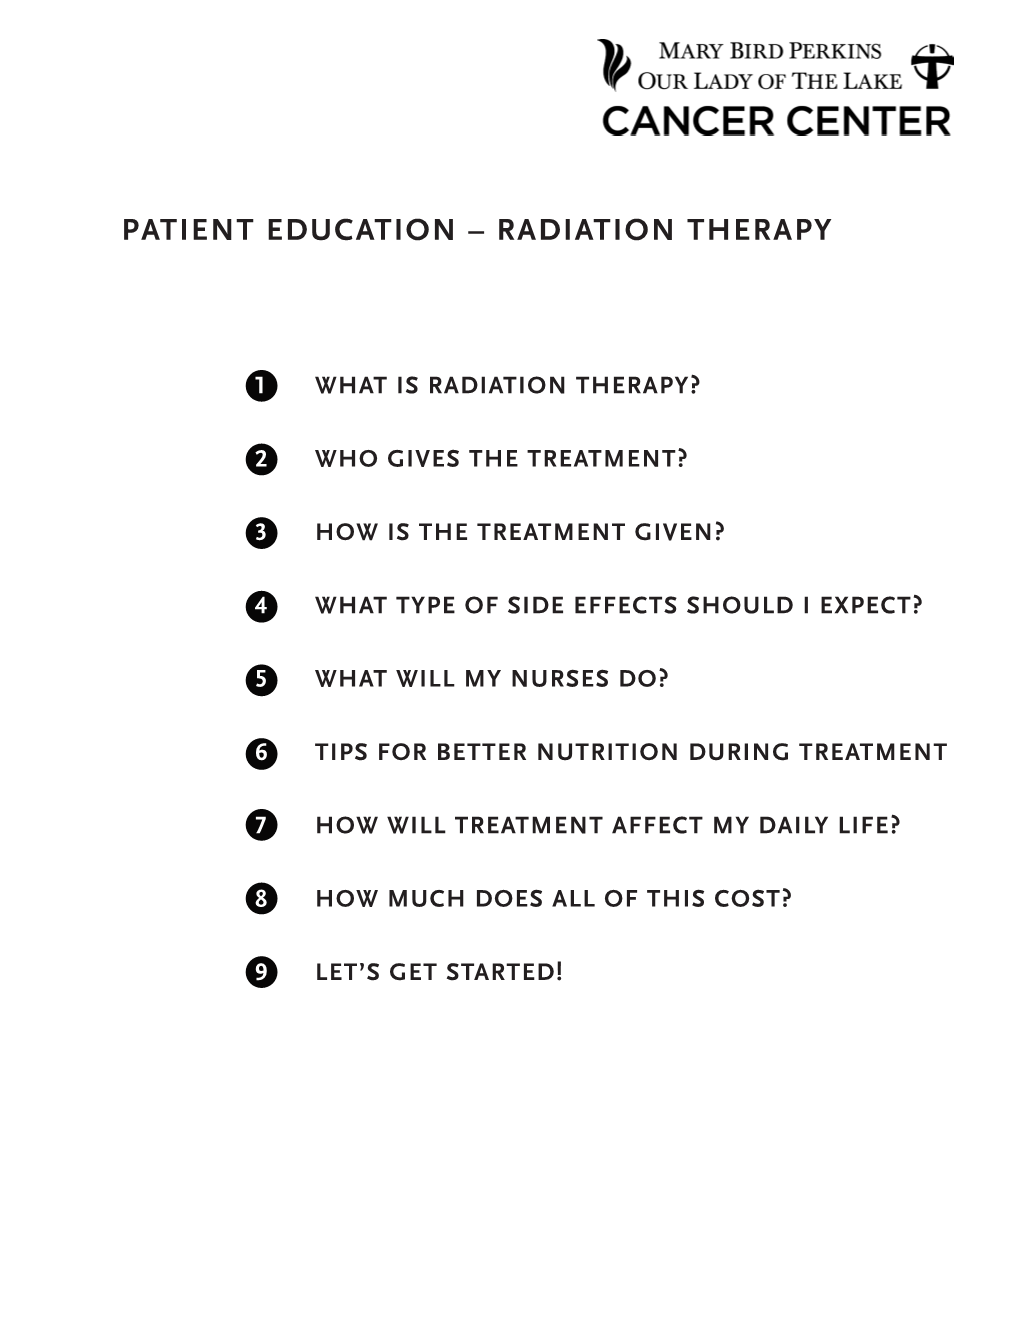 Patient Education – Radiation Therapy